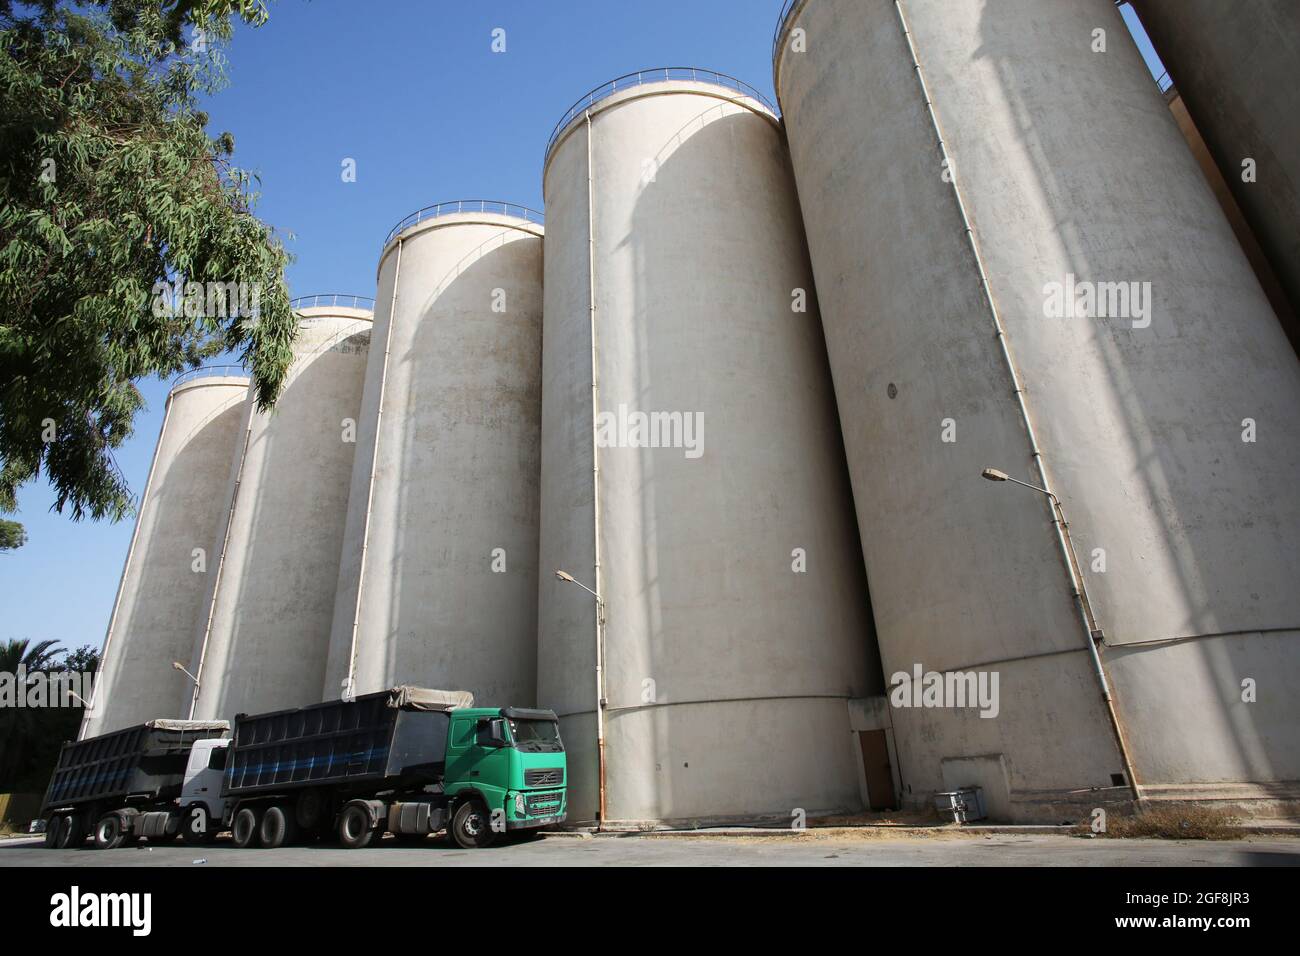 Trucks seen parked in front of the grain silos at Manouba Governorate.The cereal harvest in Tunisia stands at 16.4 million quintals this season, Tunis Afrique Presse (TAP / Official) said, citing the Tunisian agriculture ministry. On the logistics side, 176 collection centers have been validated out of the 186 distributed throughout the country, and 7.9 million quintals of cereals collected. (Photo by Jdidi wassim / SOPA Images/Sipa USA) Stock Photo